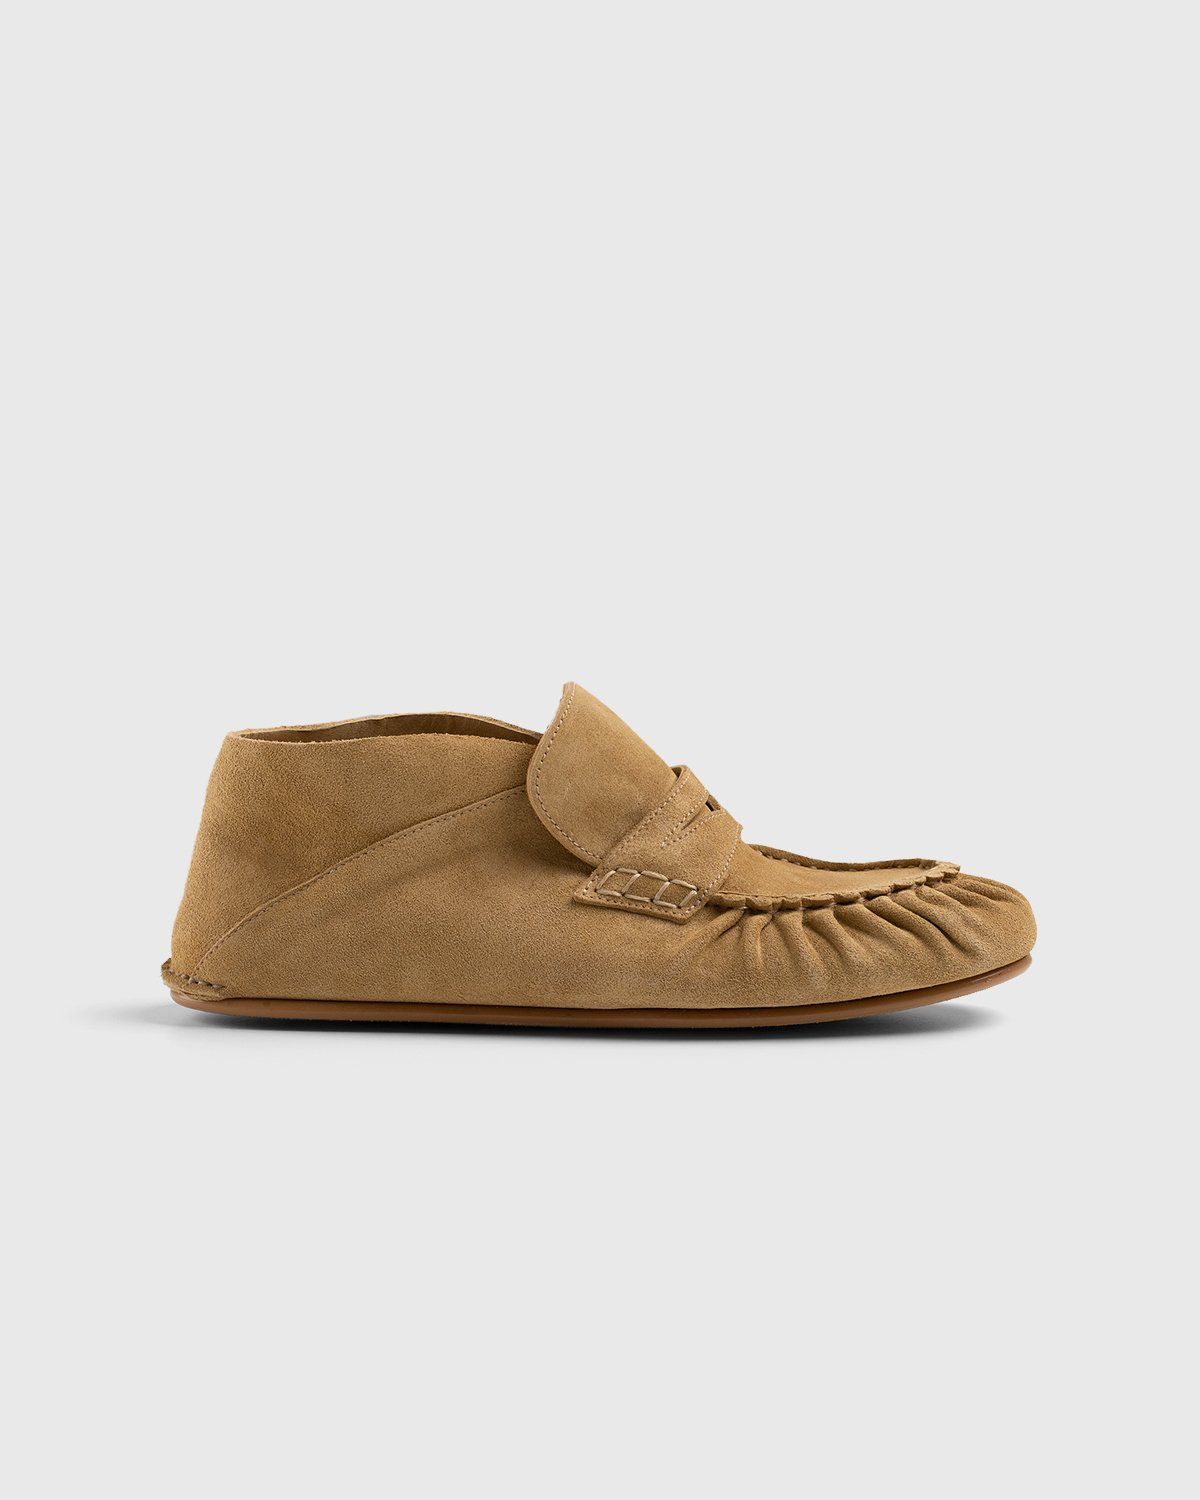 Loewe – Paula's Ibiza Suede Loafer Gold - Shoes - Brown - Image 1